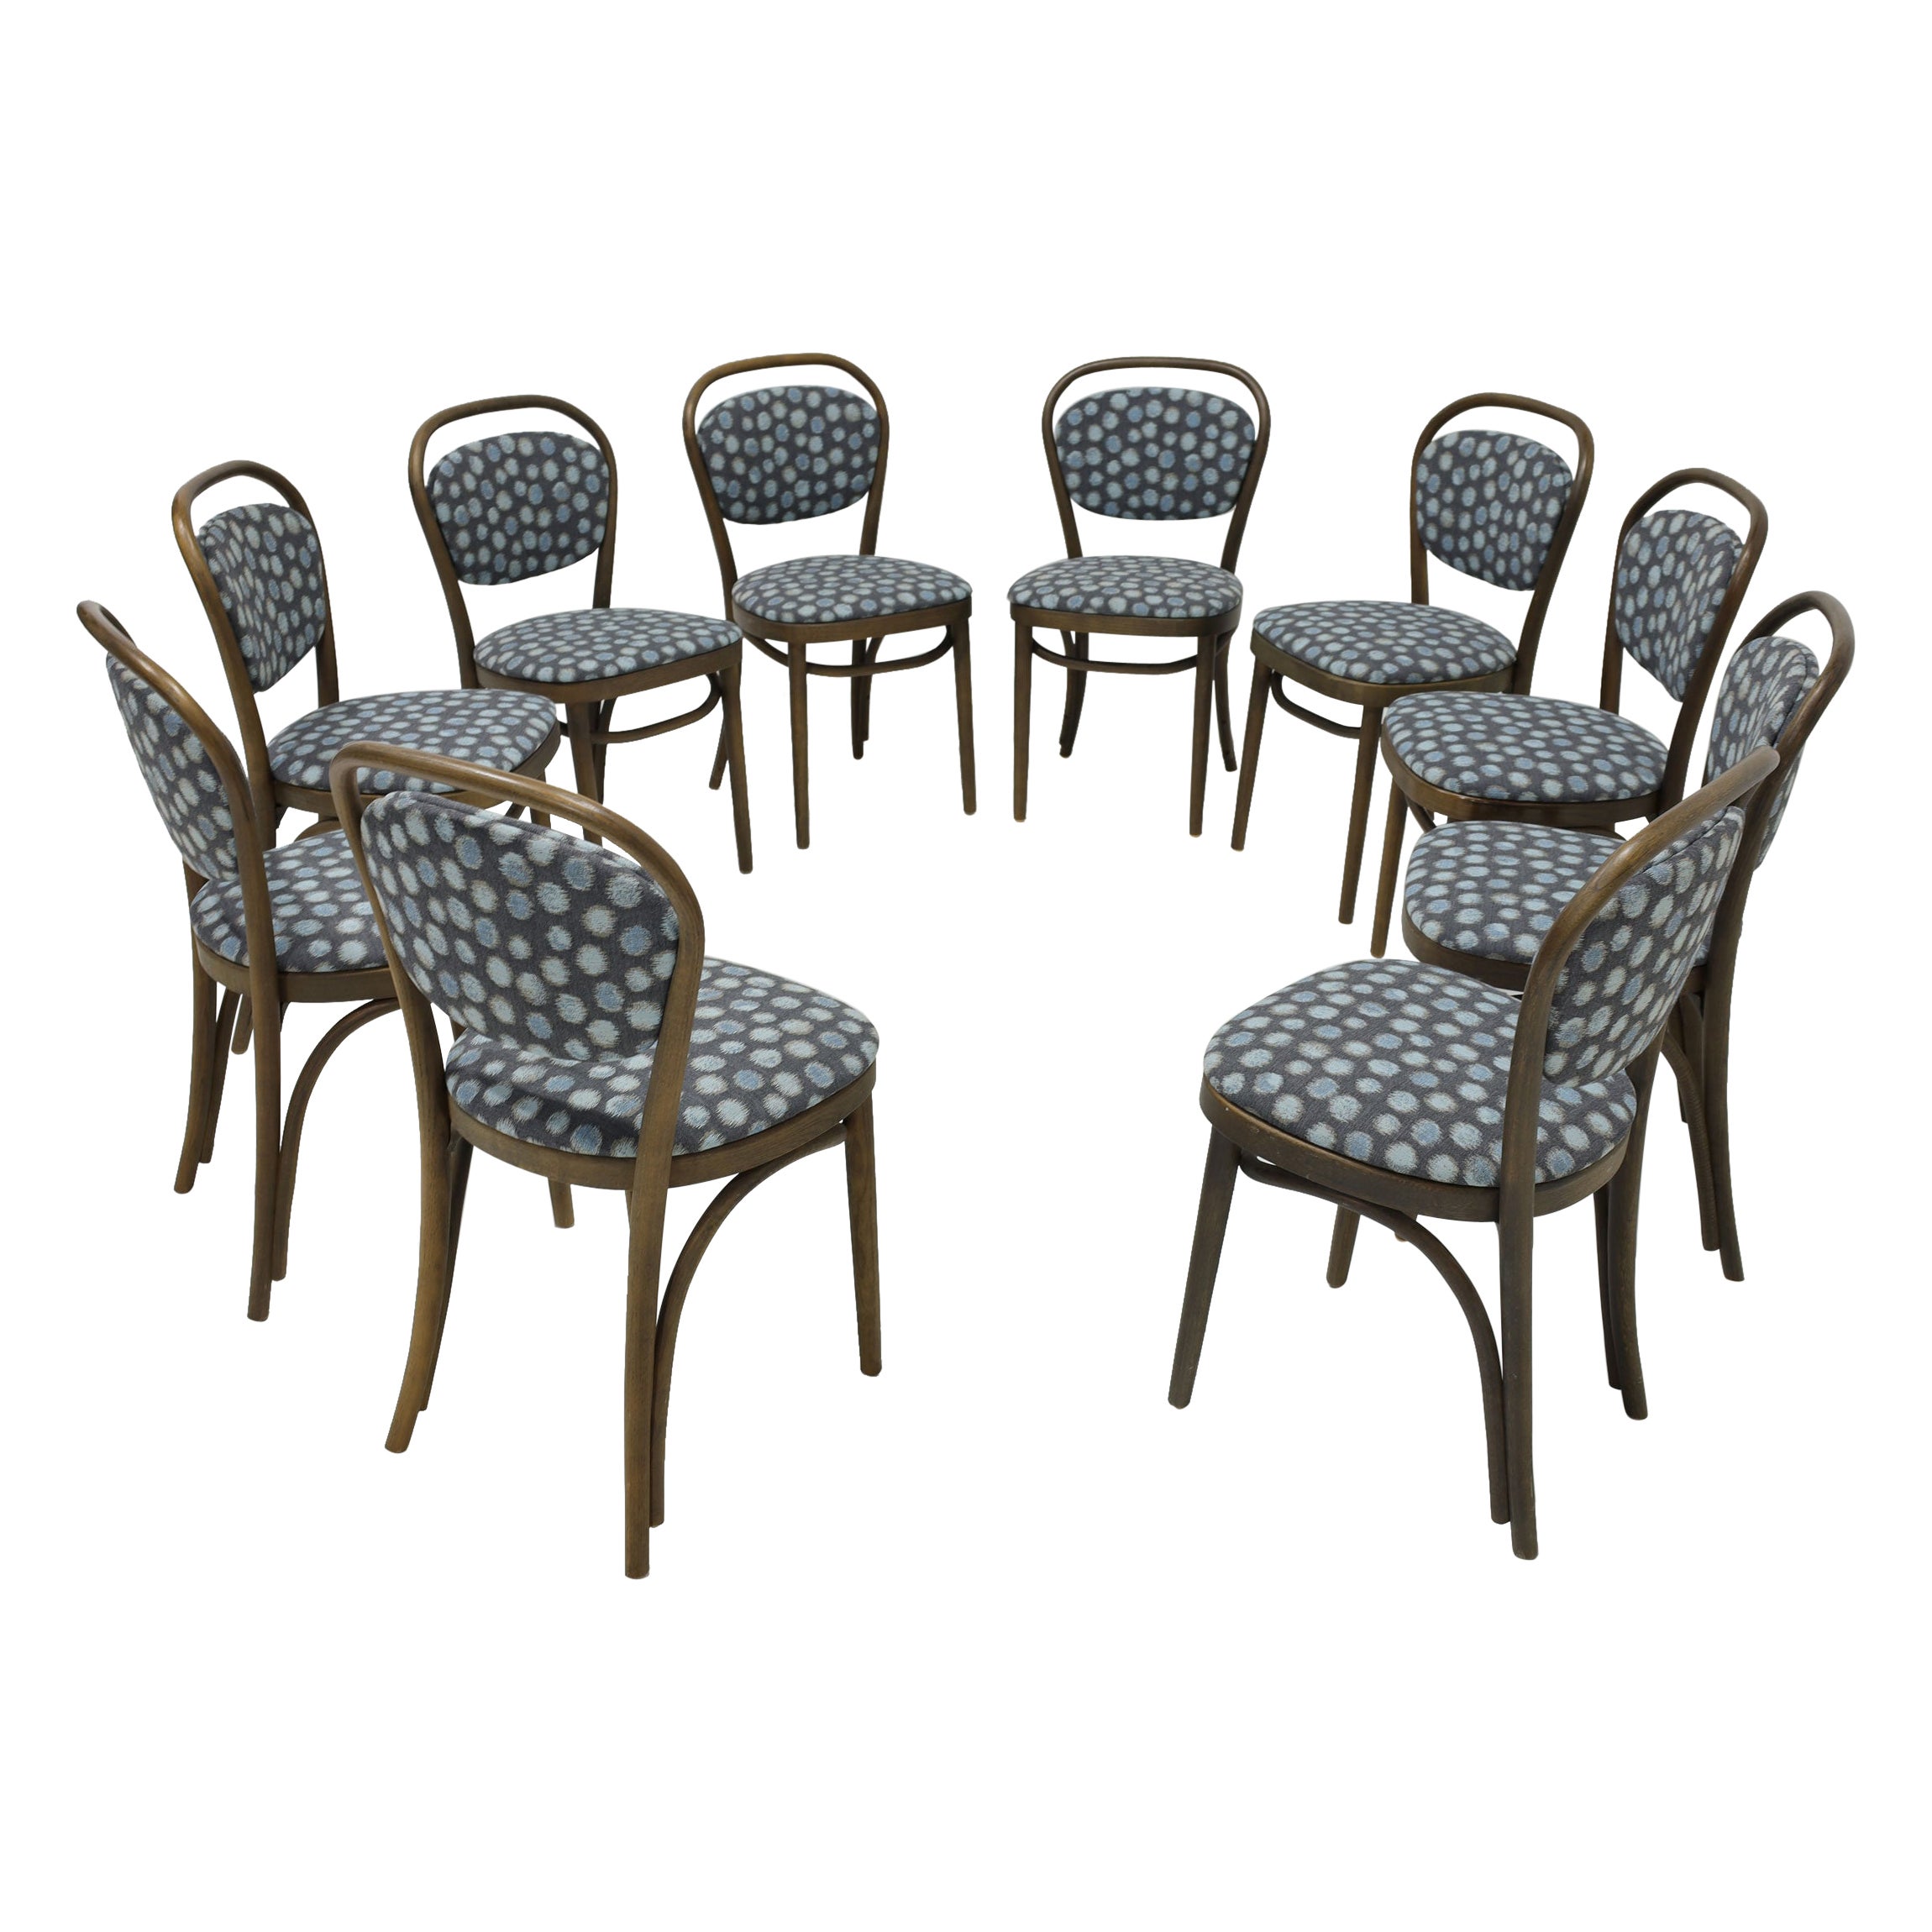 Thonet Dining Chairs, Set of Ten, Perennials Performance Fabric, 1980s For Sale